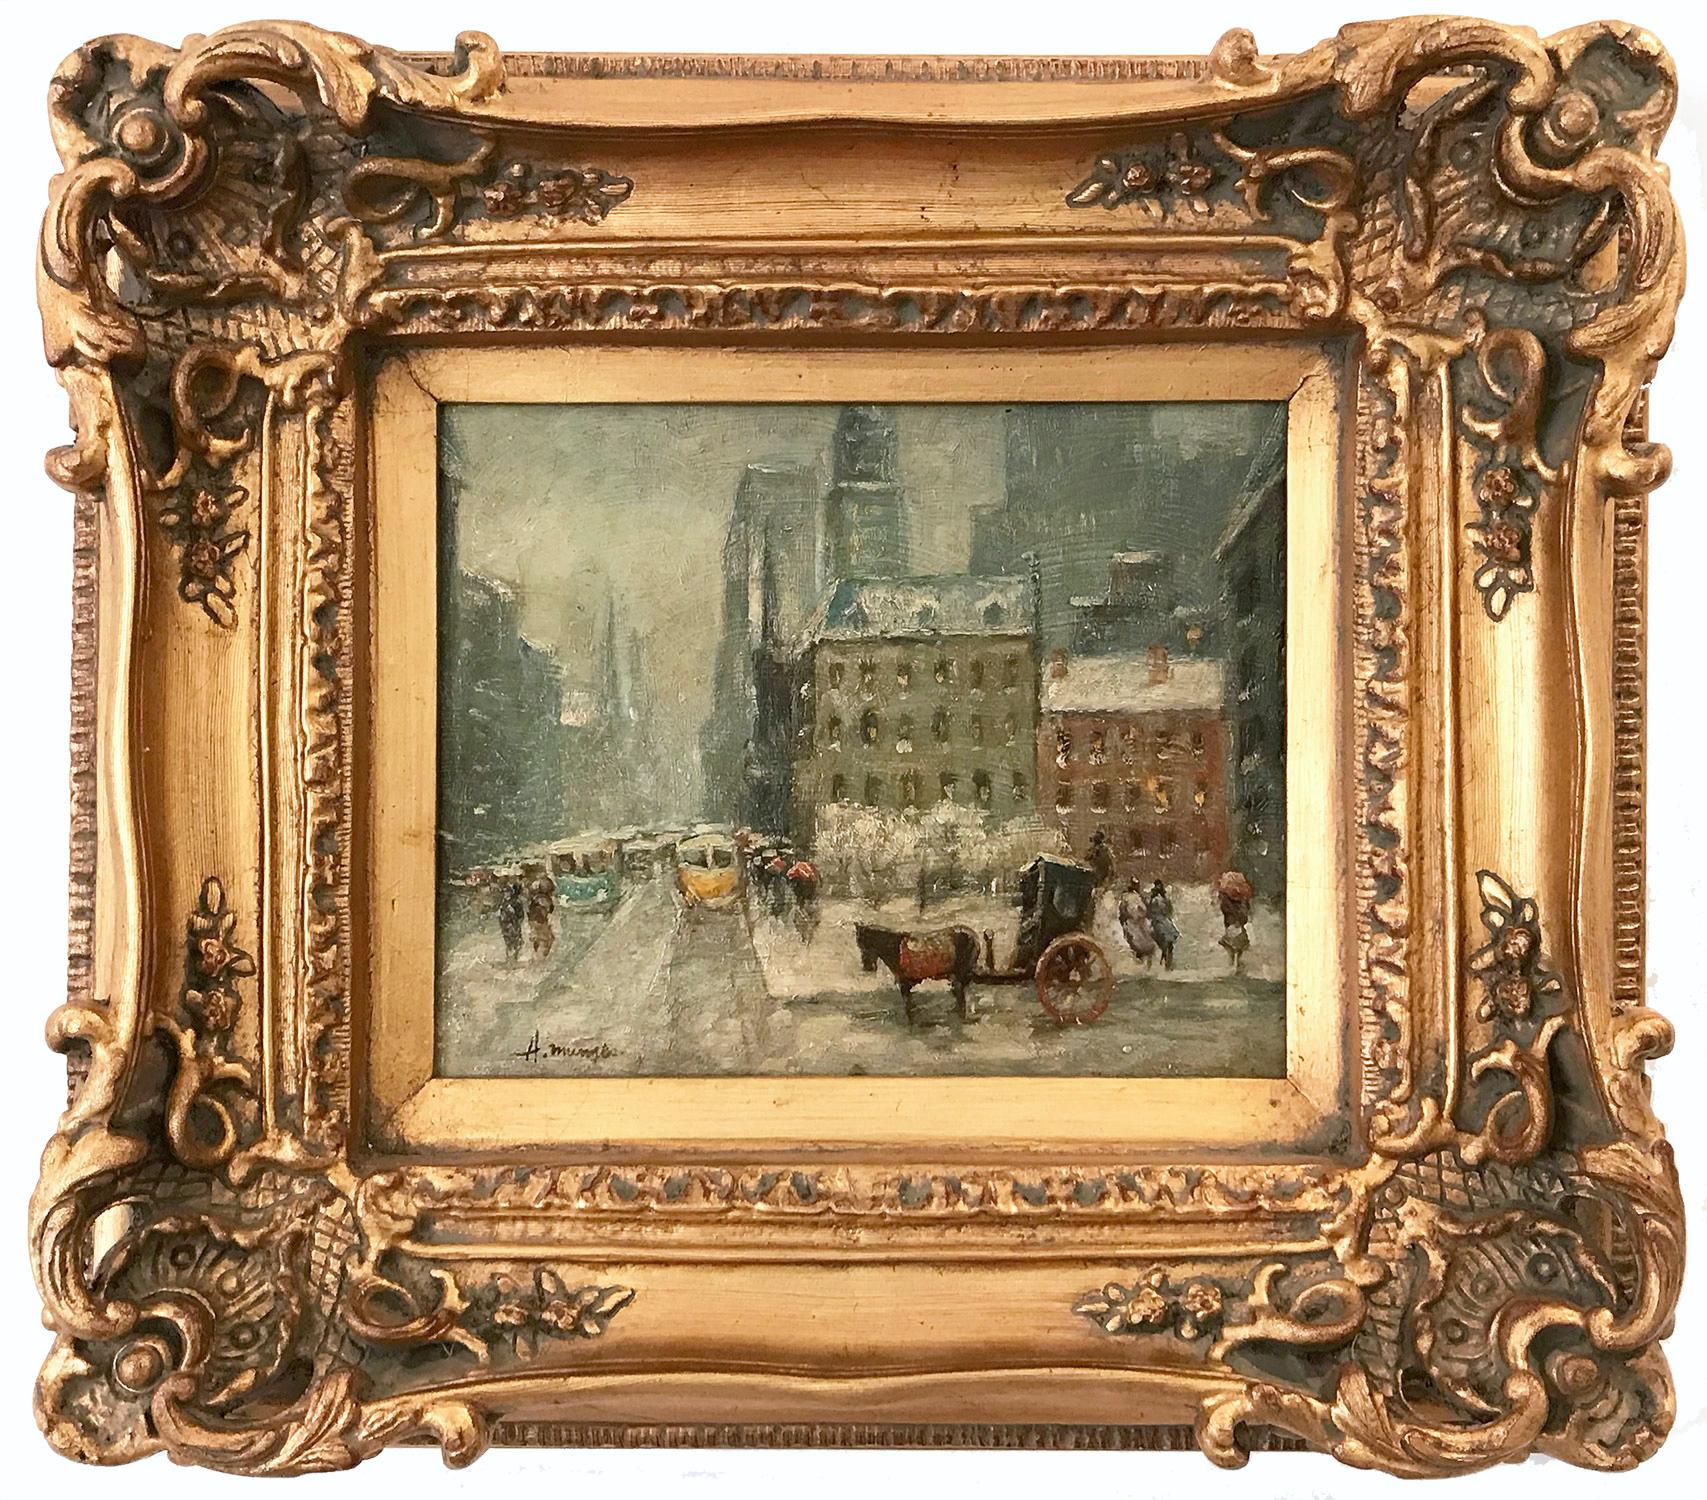 This painting depicts an impressionistic scene of New York, Central Park West on a snowy day after Guy Wiggins. The artist is unknown but was active in the 20th Century. Beautiful brushwork and whimsical colors. The work captures Manhattan and times